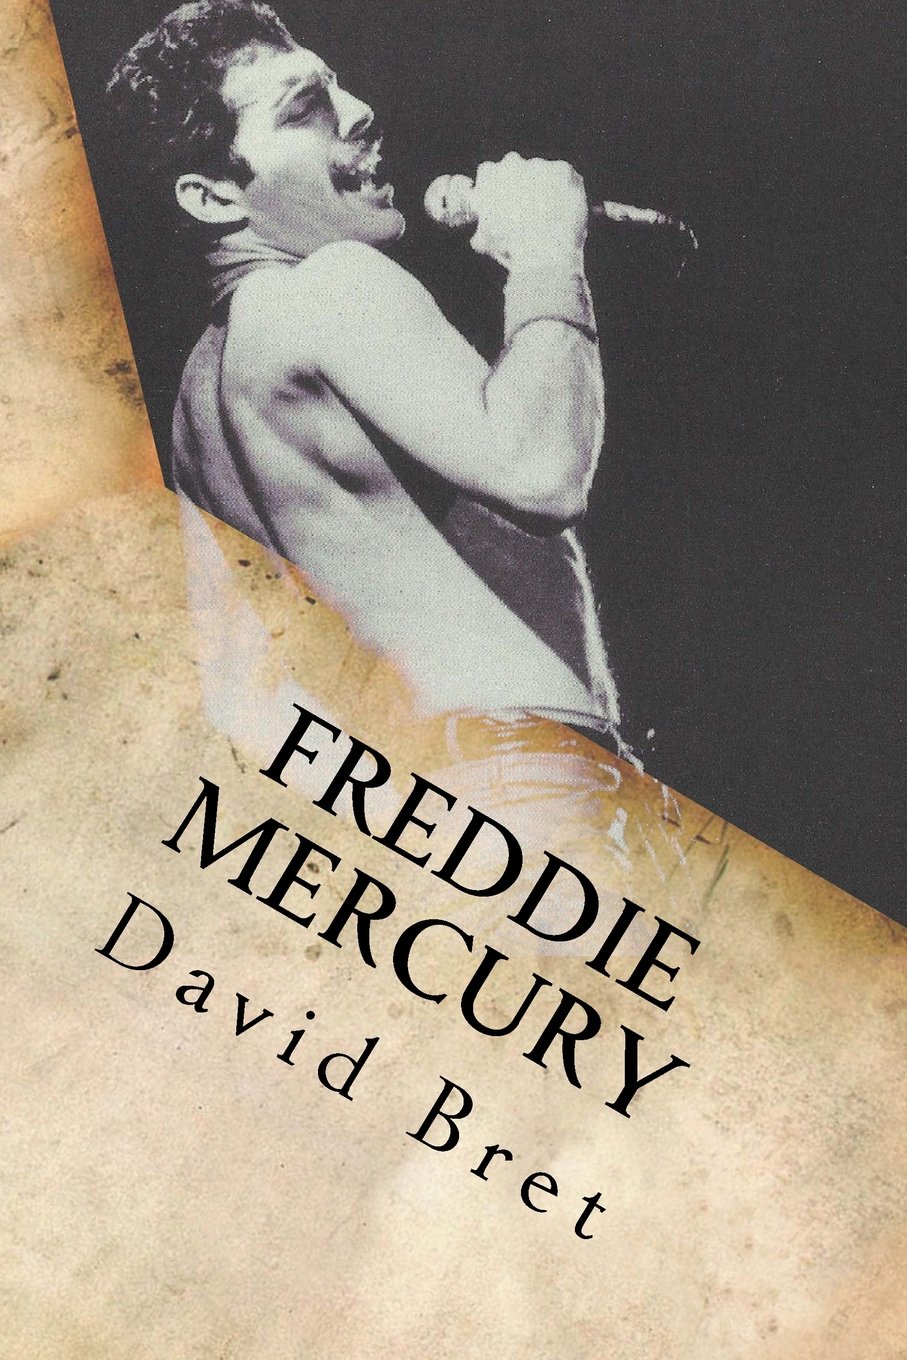 Book Cover Freddie Mercury: The Biography